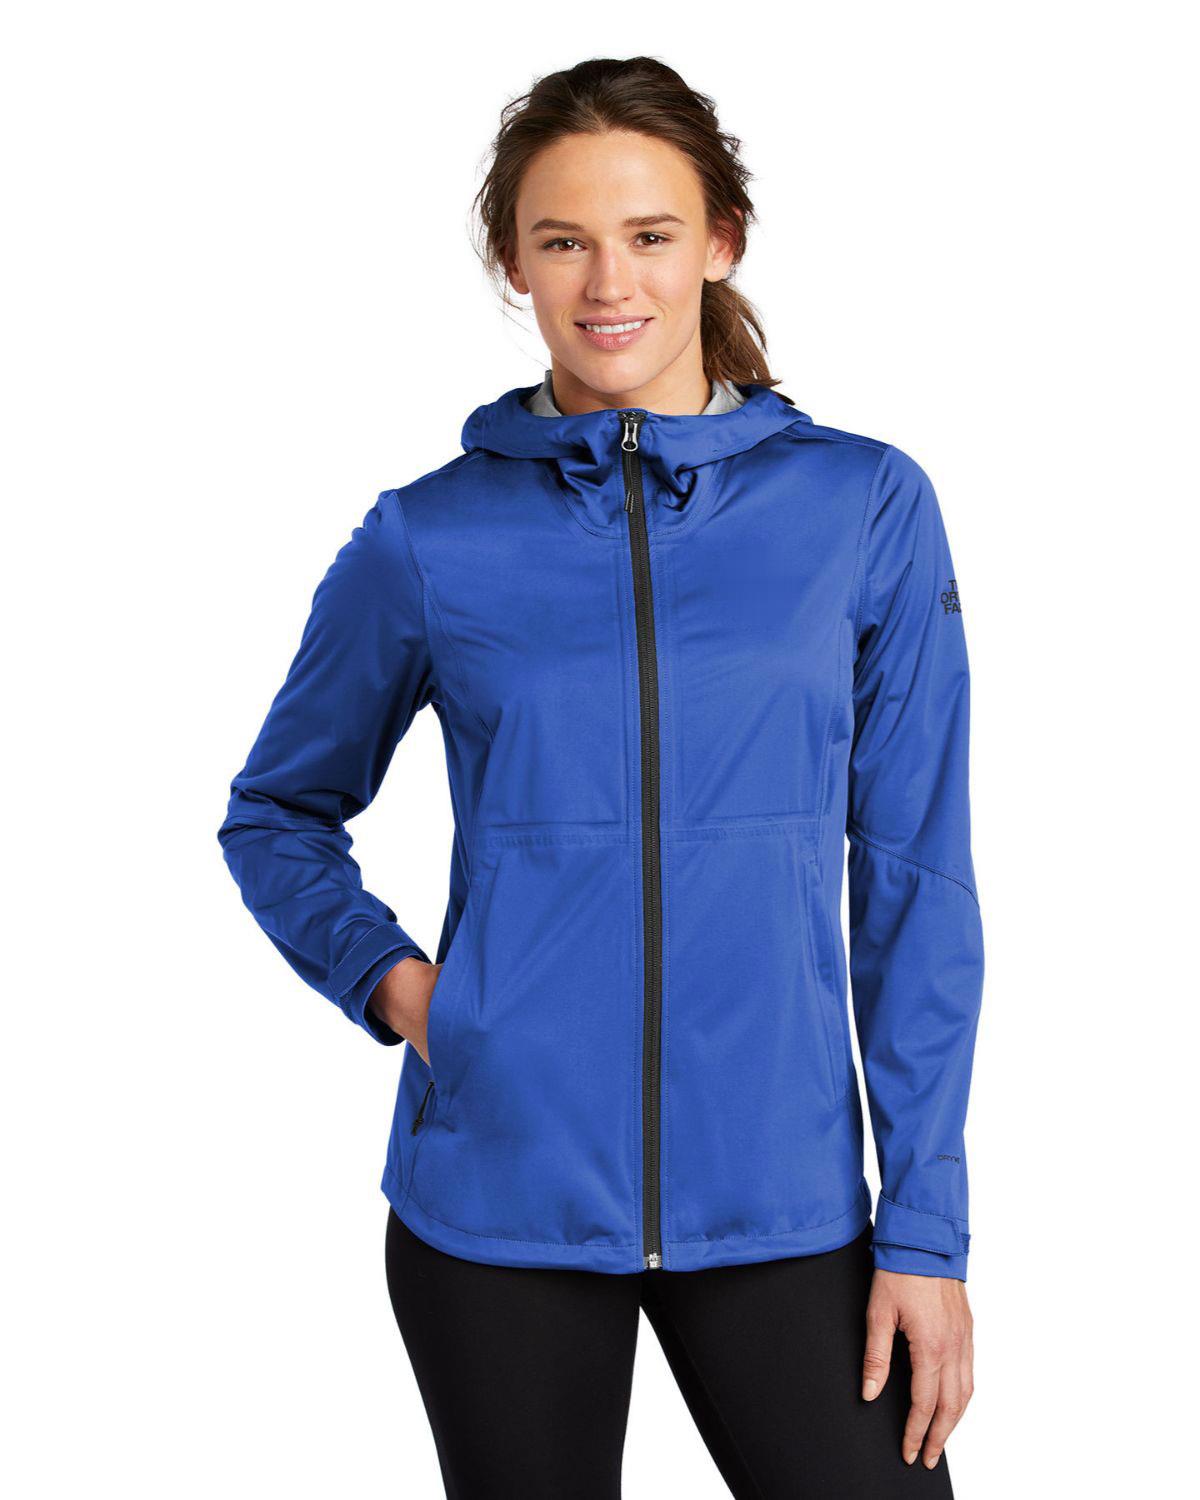 Size Chart for The North Face NF0A47FH Ladies All Weather DryVent ...